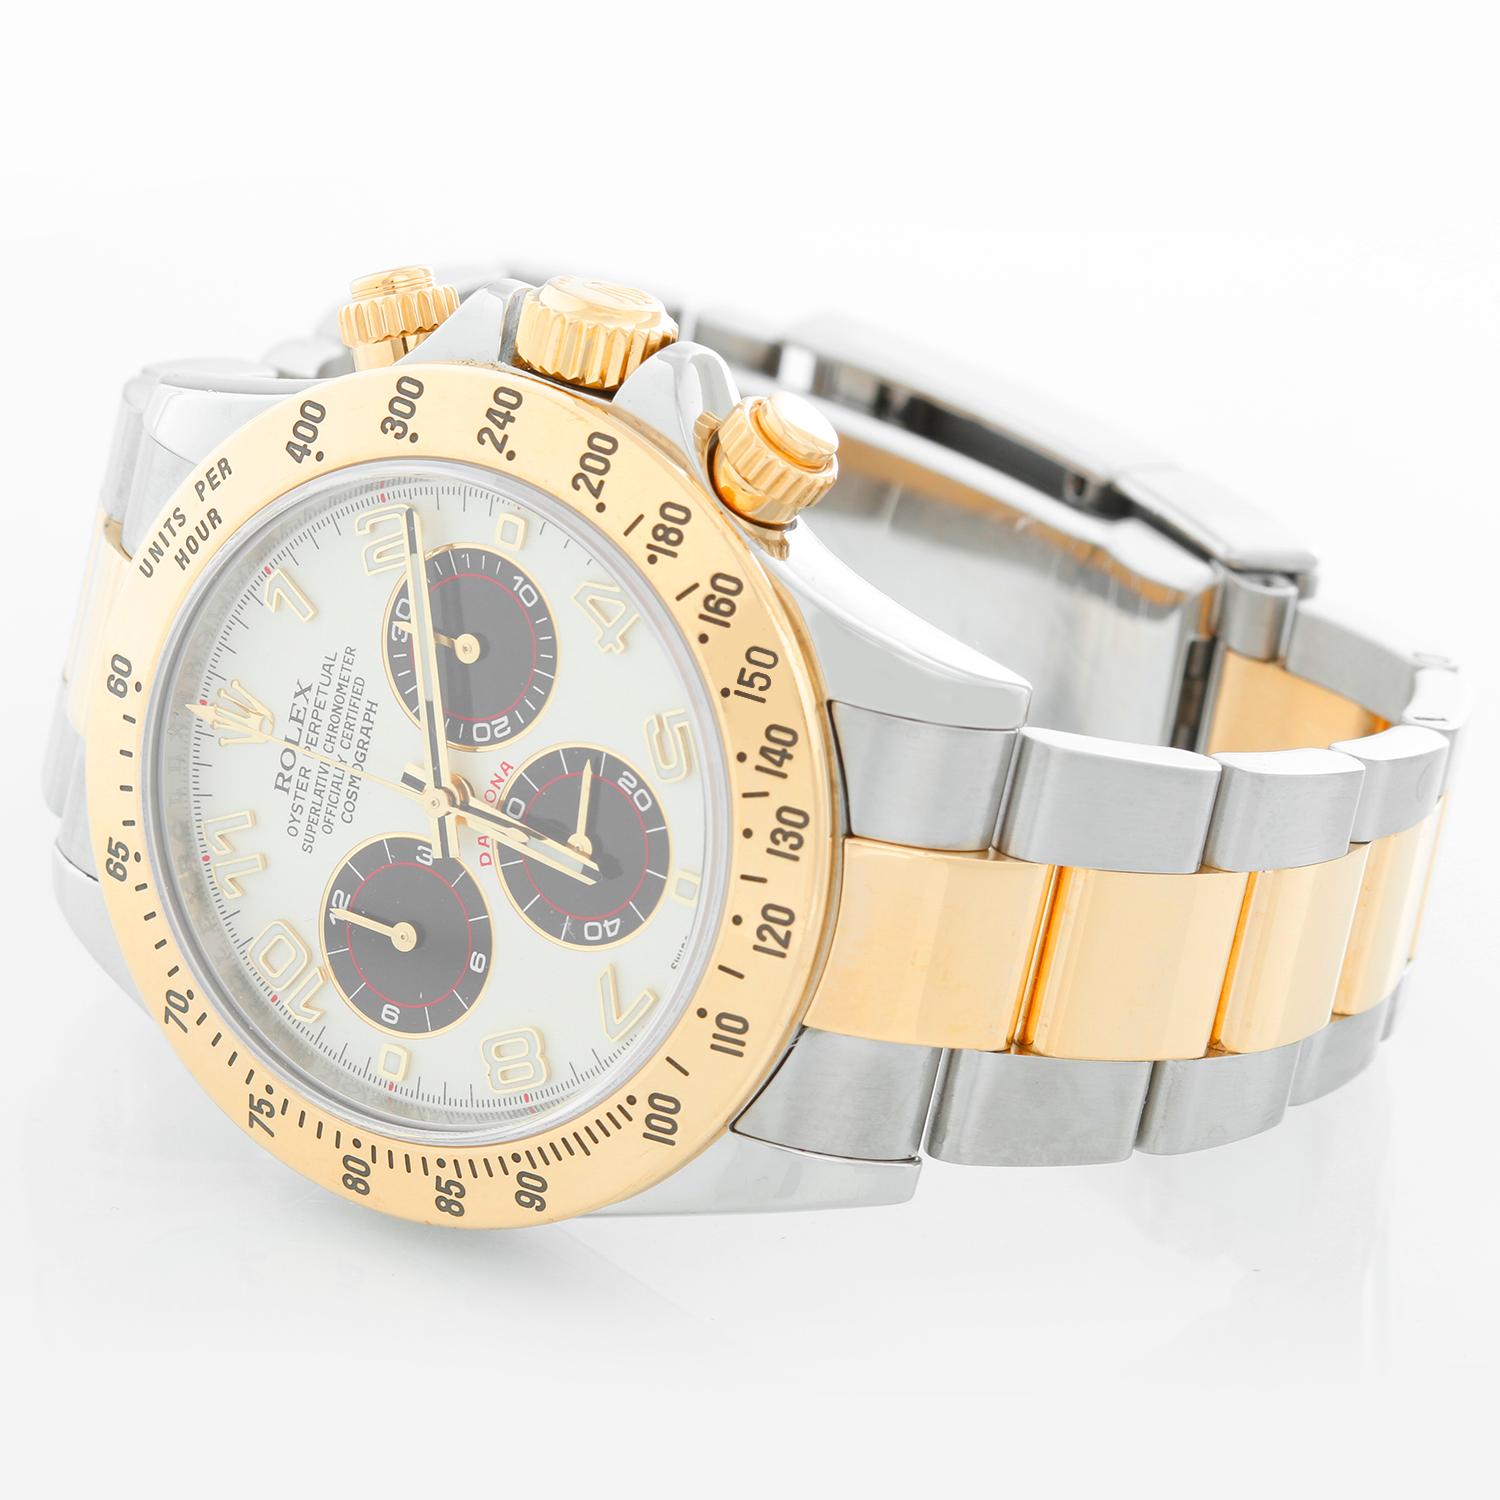 Rolex Cosmograph Daytona Men's Steel & Gold Watch 116523 Panda Dial  - Automatic winding, chronograph, 44 jewels, sapphire crystal. Stainless steel case with 18k yellow gold beel (40mm diameter). White dial with gold Arabic numerals and black